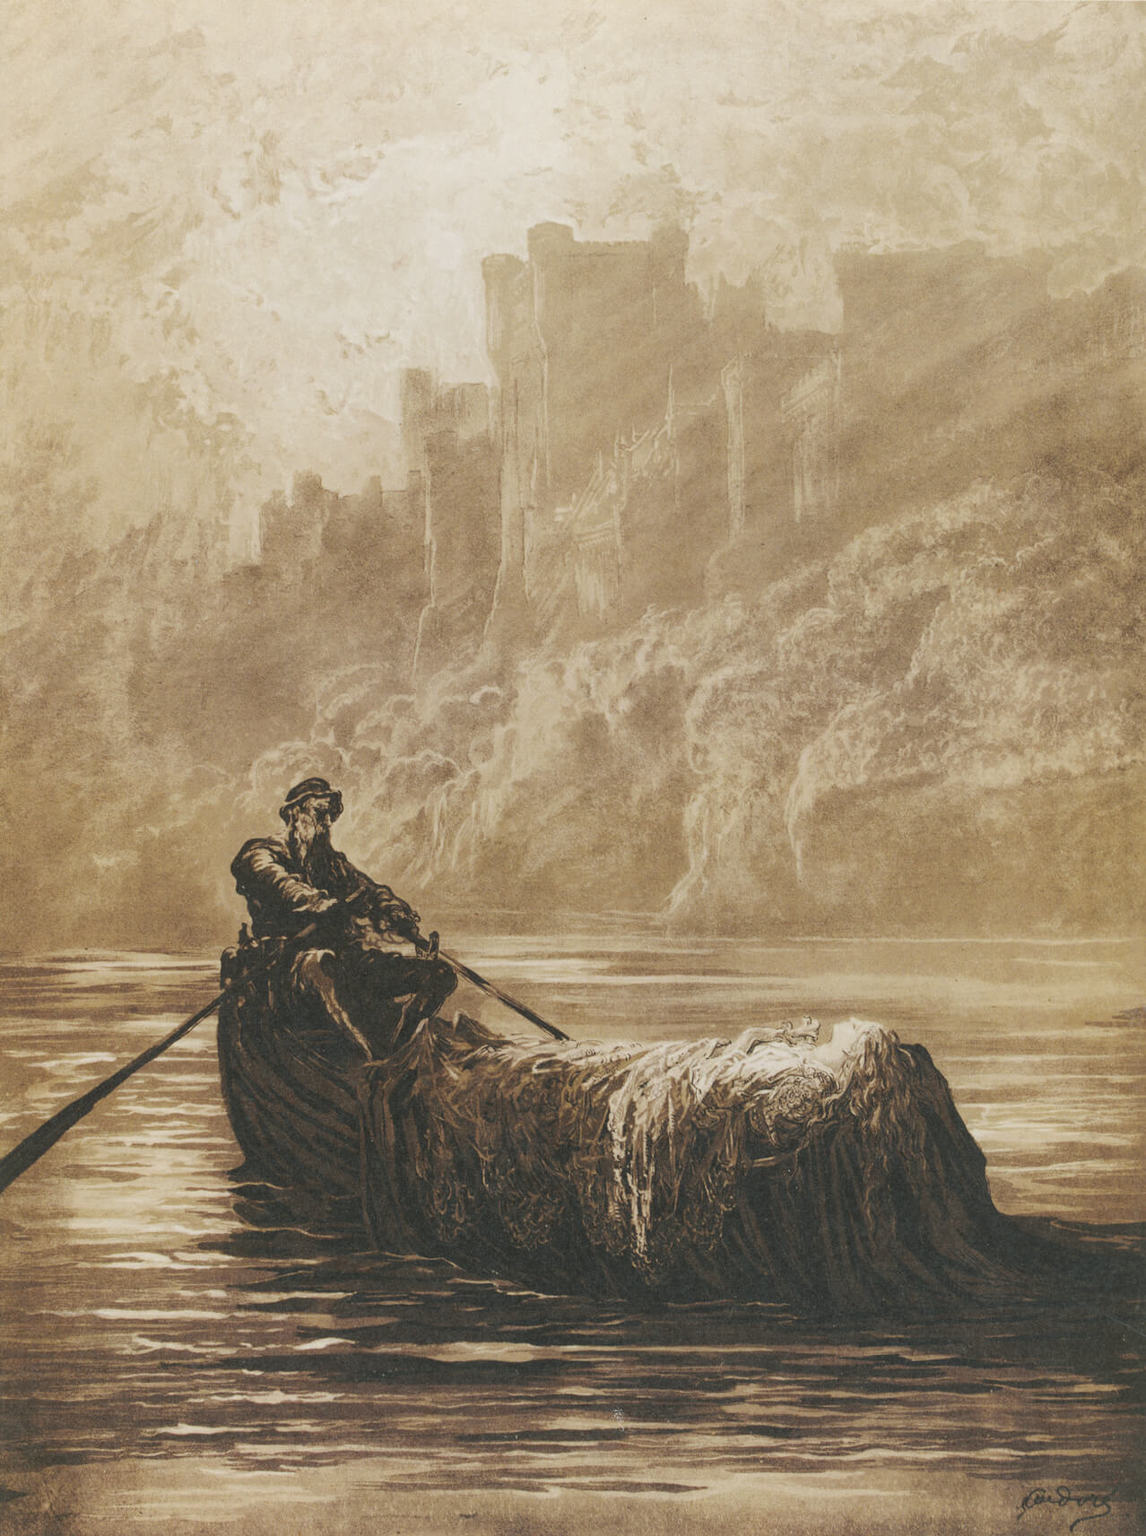 Gustave Doré, The Dead Steer’d by the Dumb, steel engraving by James H. Baker